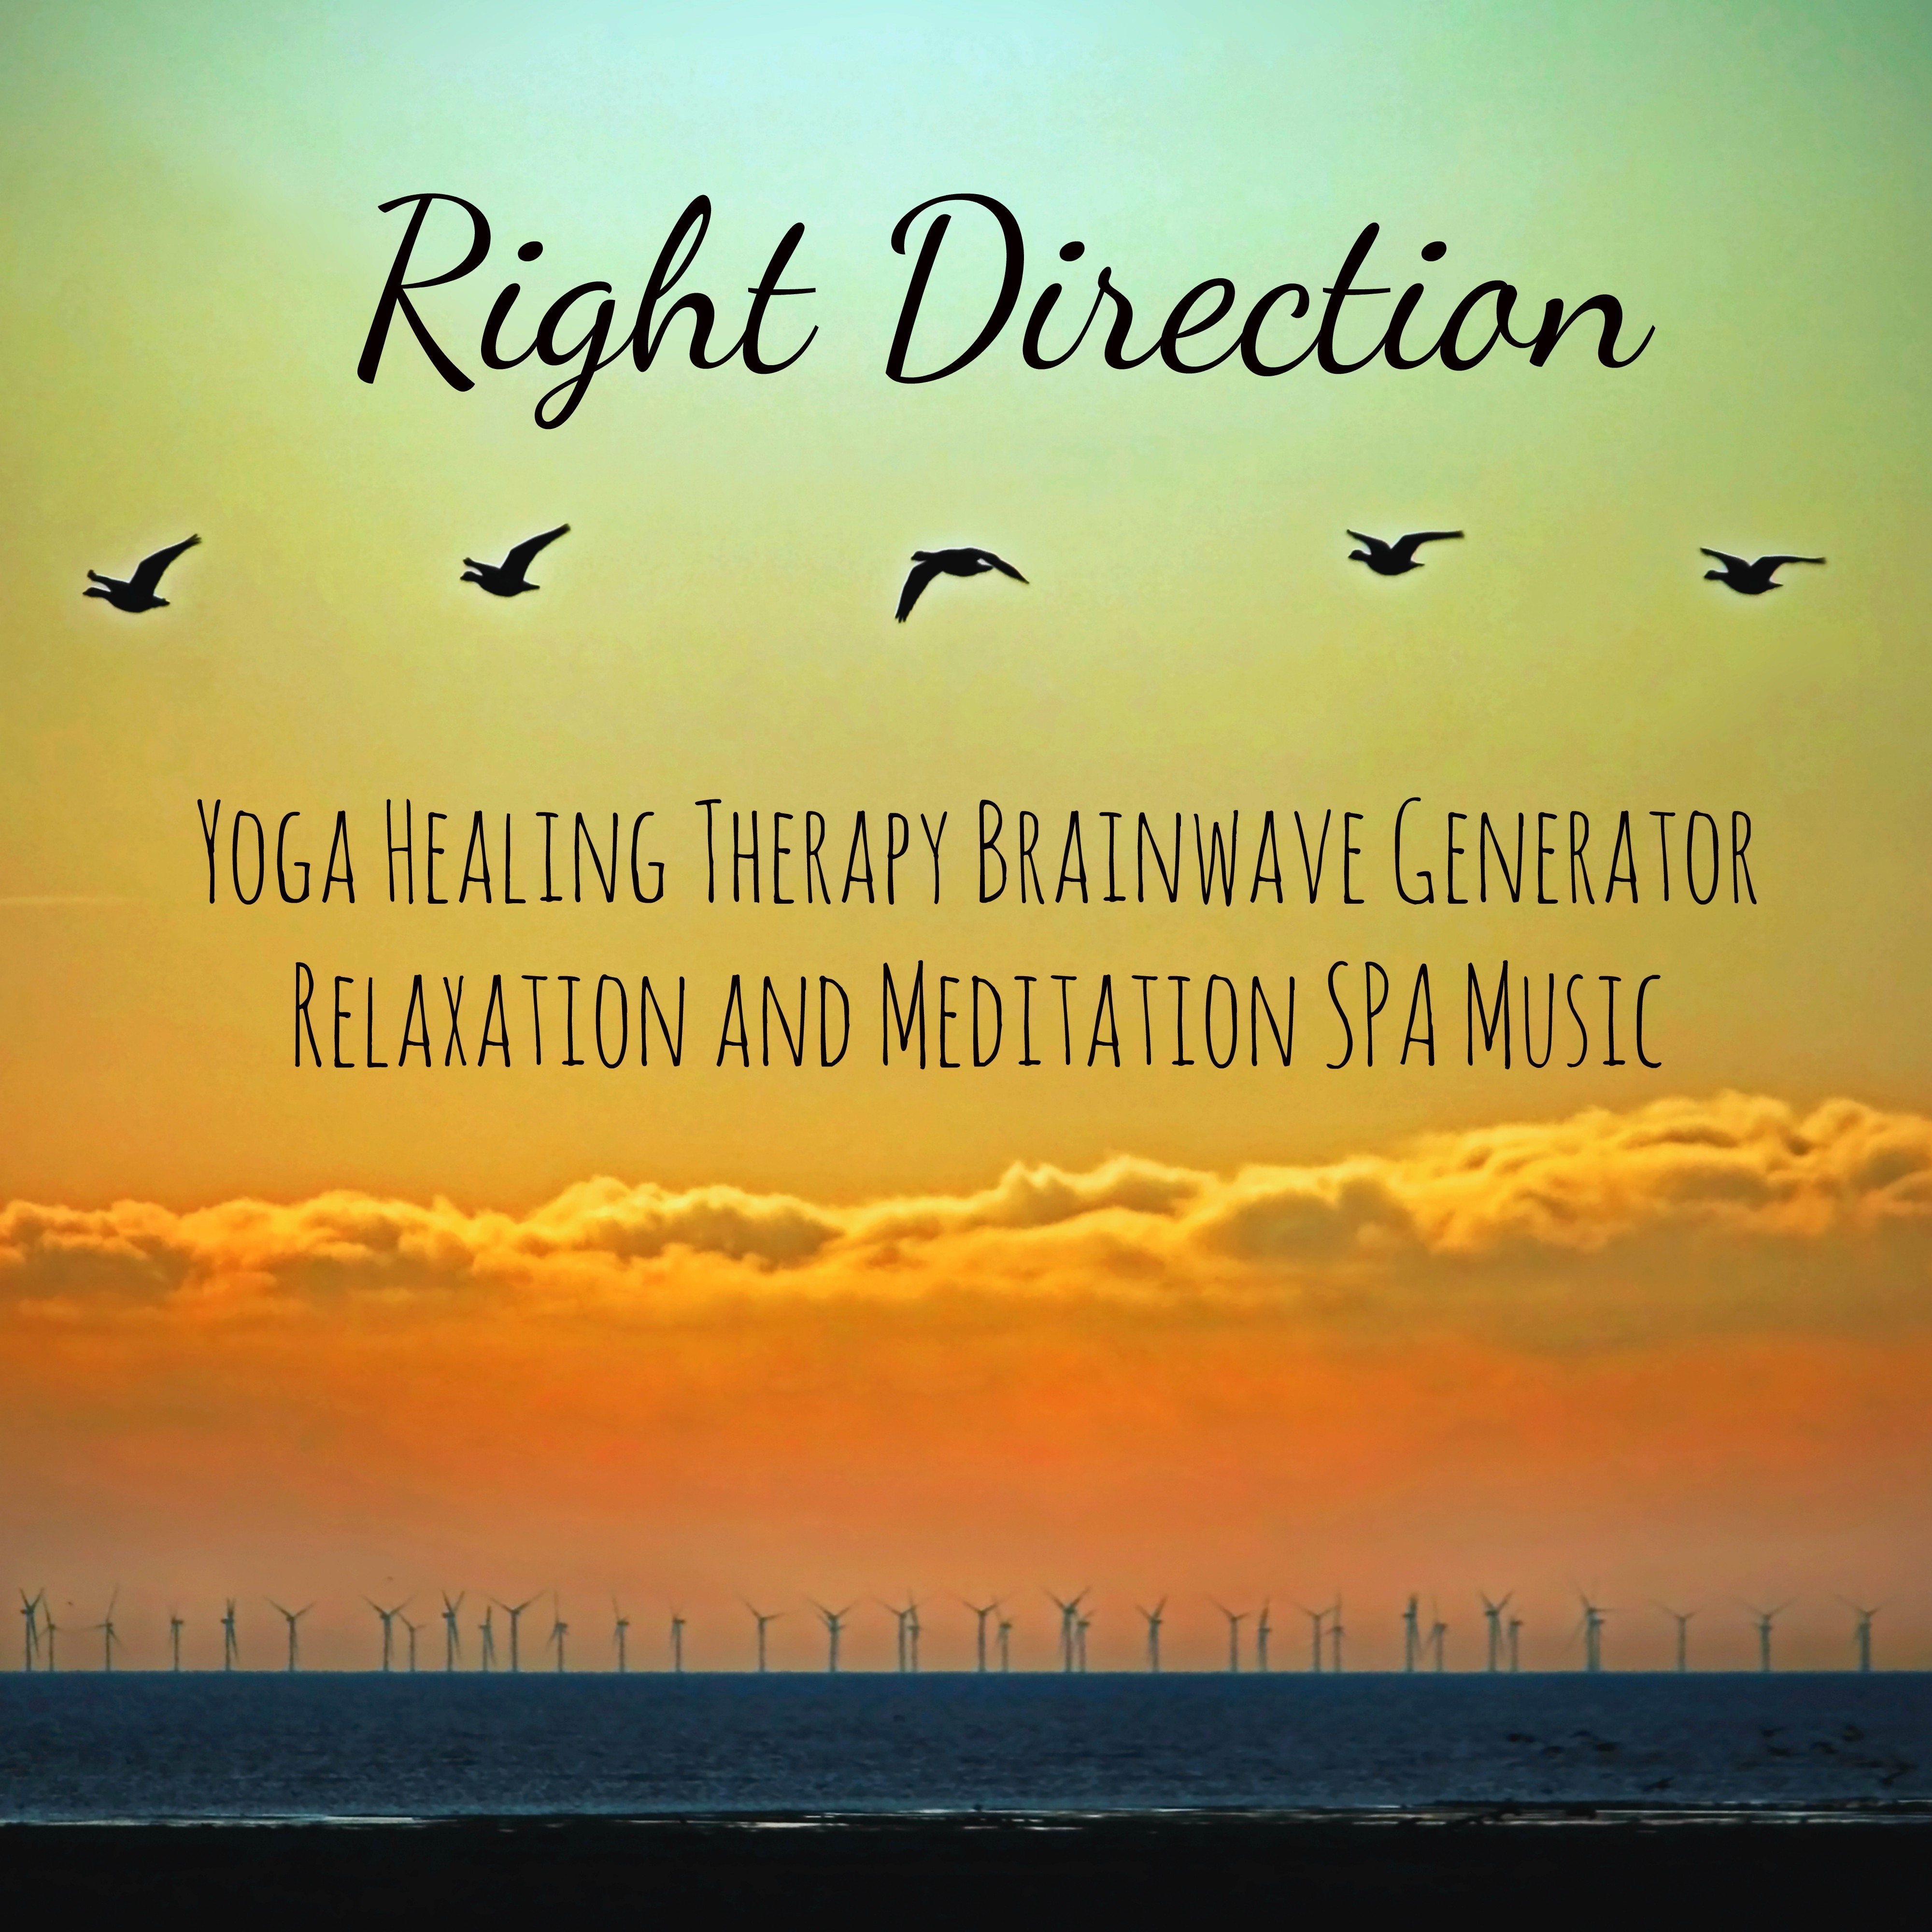 Right Direction - Yoga Healing Therapy Brainwave Generator Relaxation and Meditation SPA Music